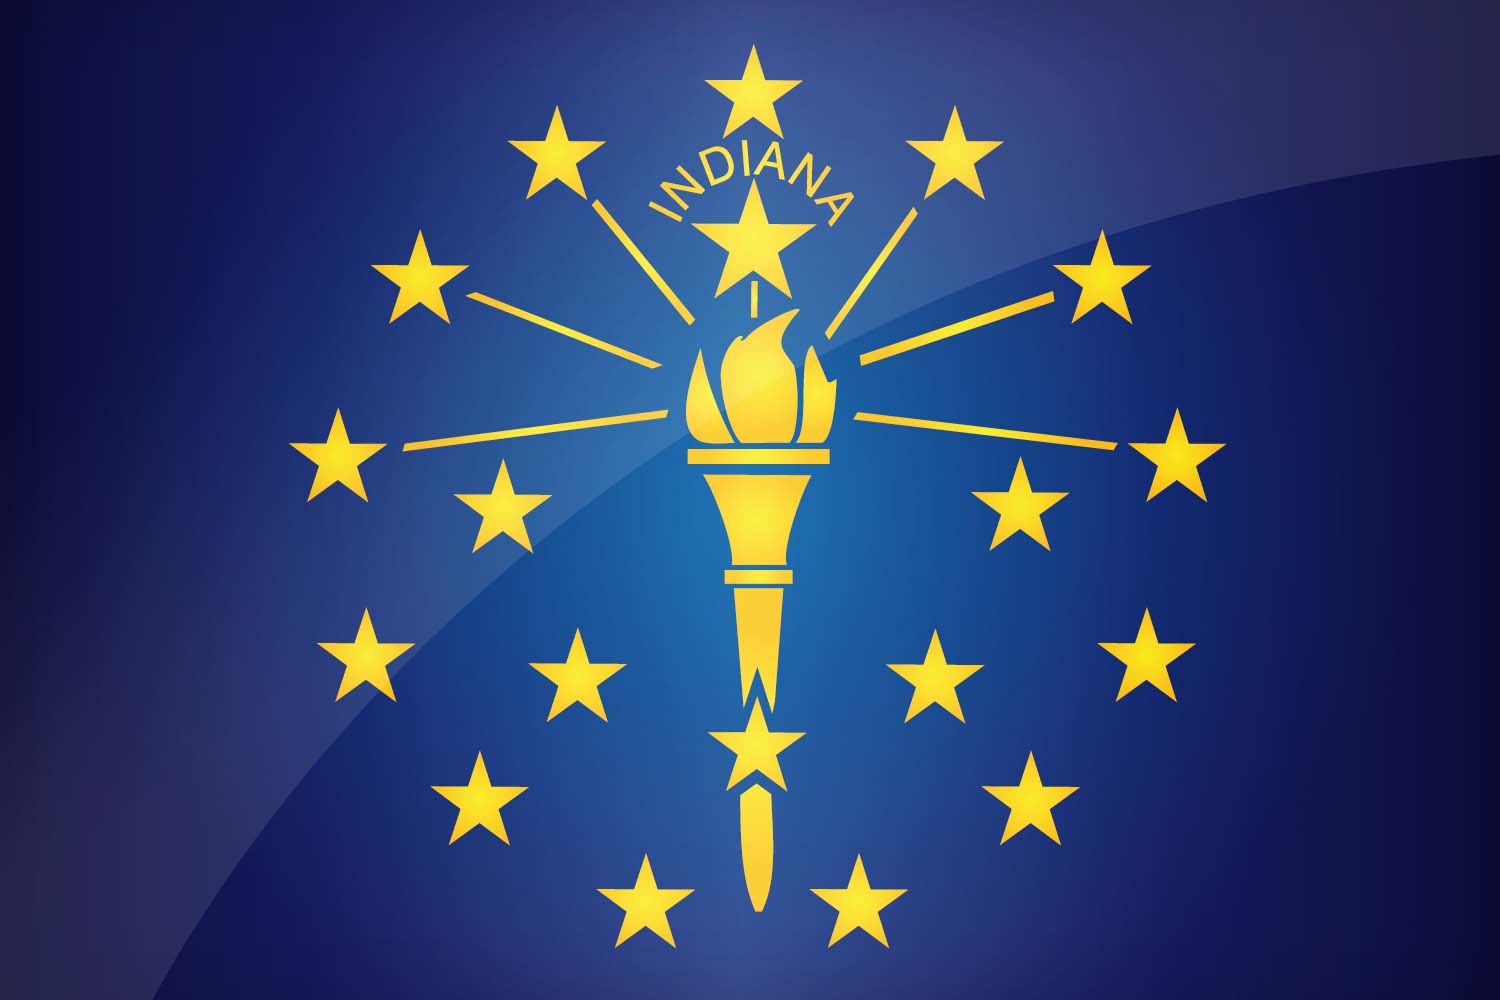 Flag of Indiana in High Resolution